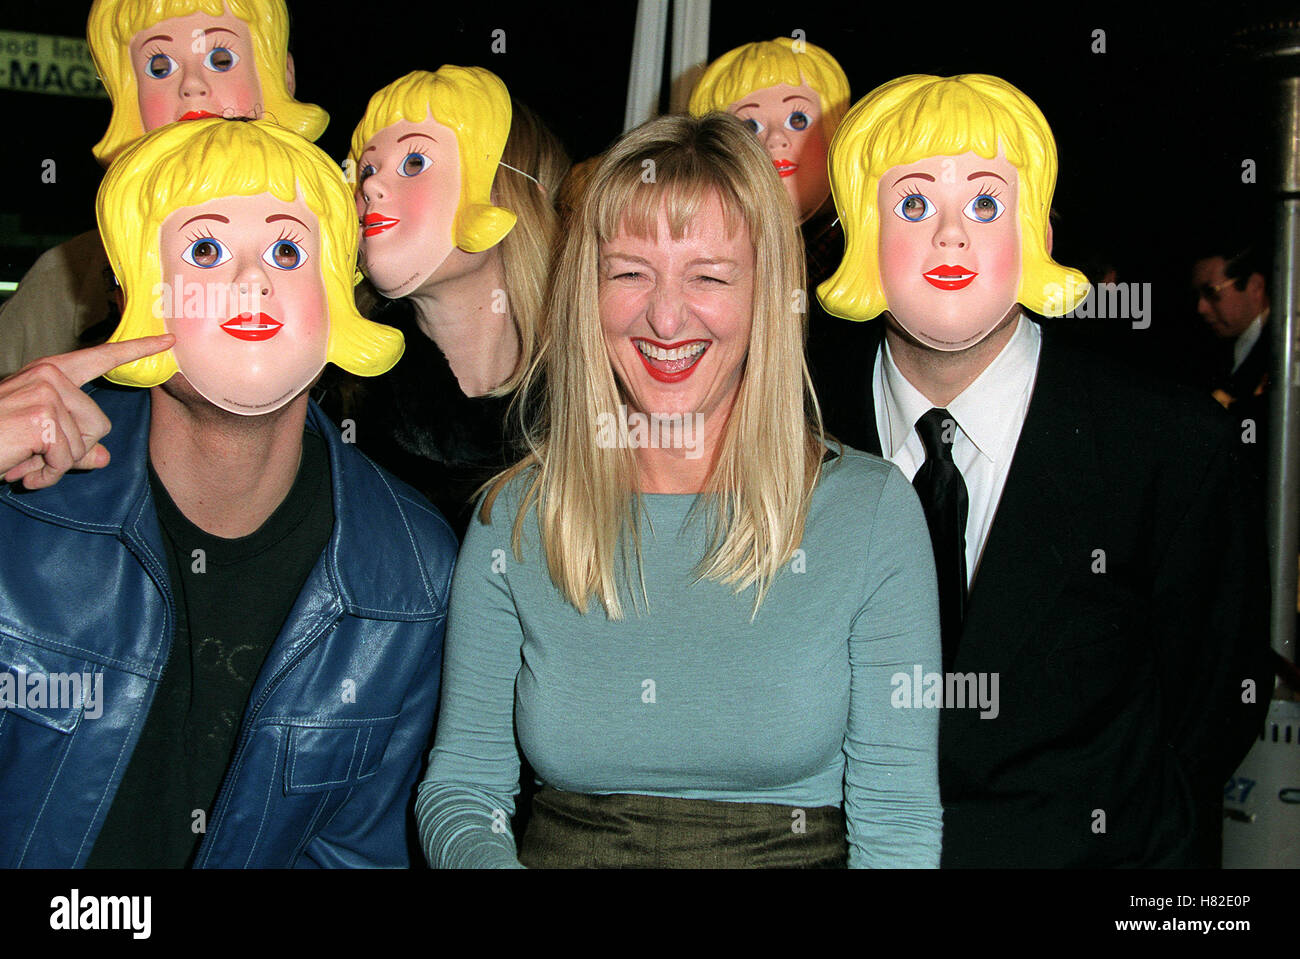 FRANCINE MCDOUGALL SUGAR AND SPICE PREMIERE LOS ANGELES LOS ANGELES USA 24 January 2001 Stock Photo